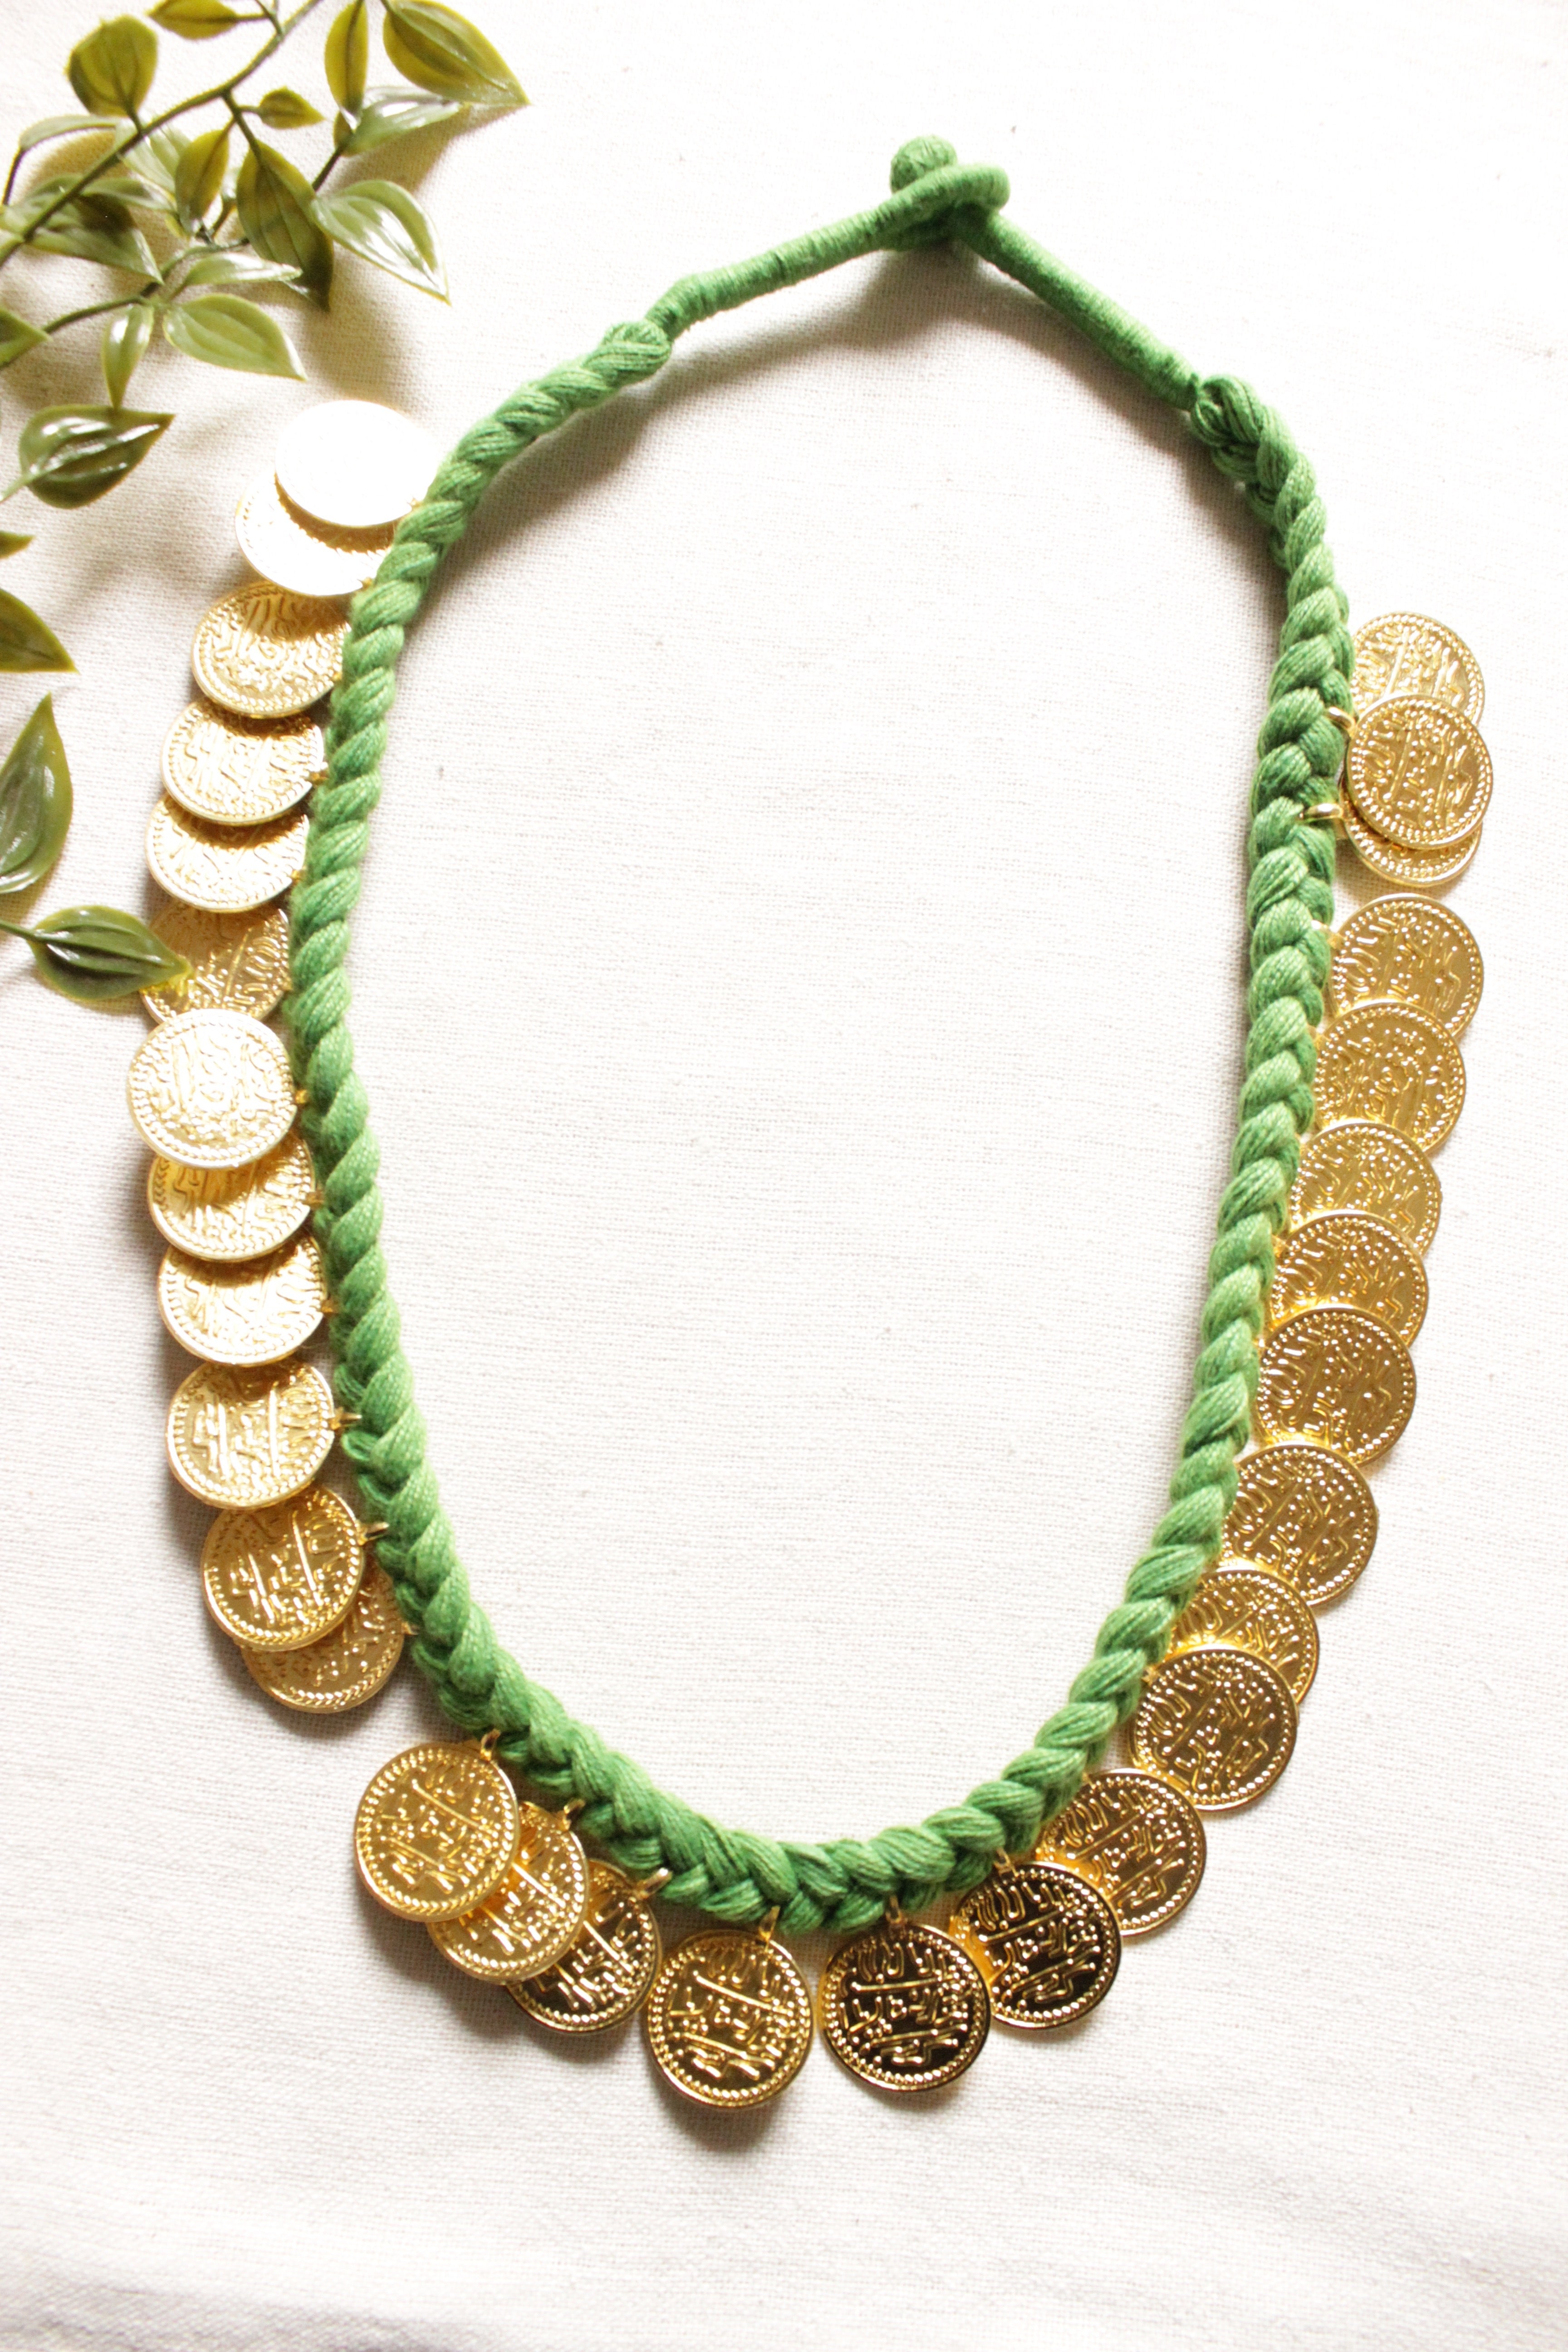 Gold Embossed Coins Braided in Green Threads Fabric Necklace